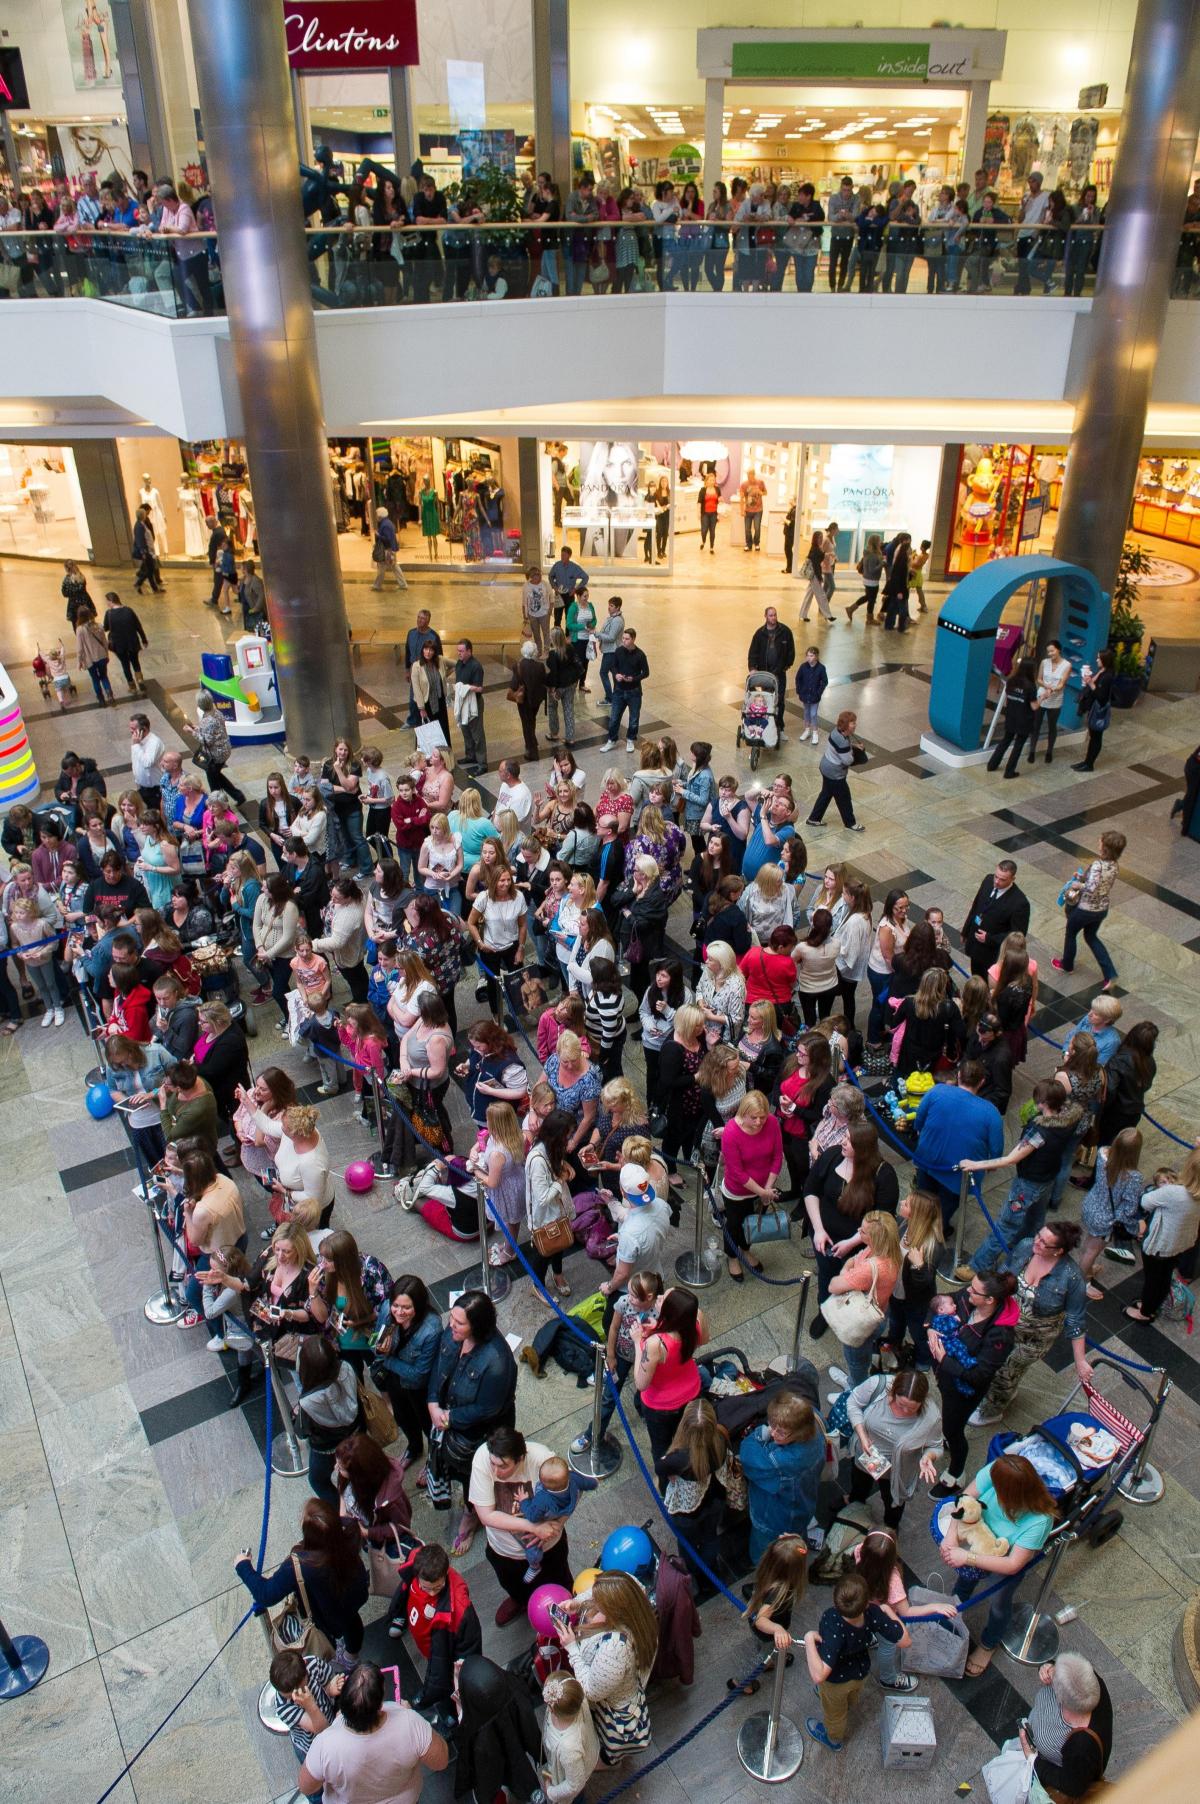 Peter Andre at WestQuay shopping centre. Weekend in Pictures. Saturday May 31, 2014 - Sunday June 1, 2014.